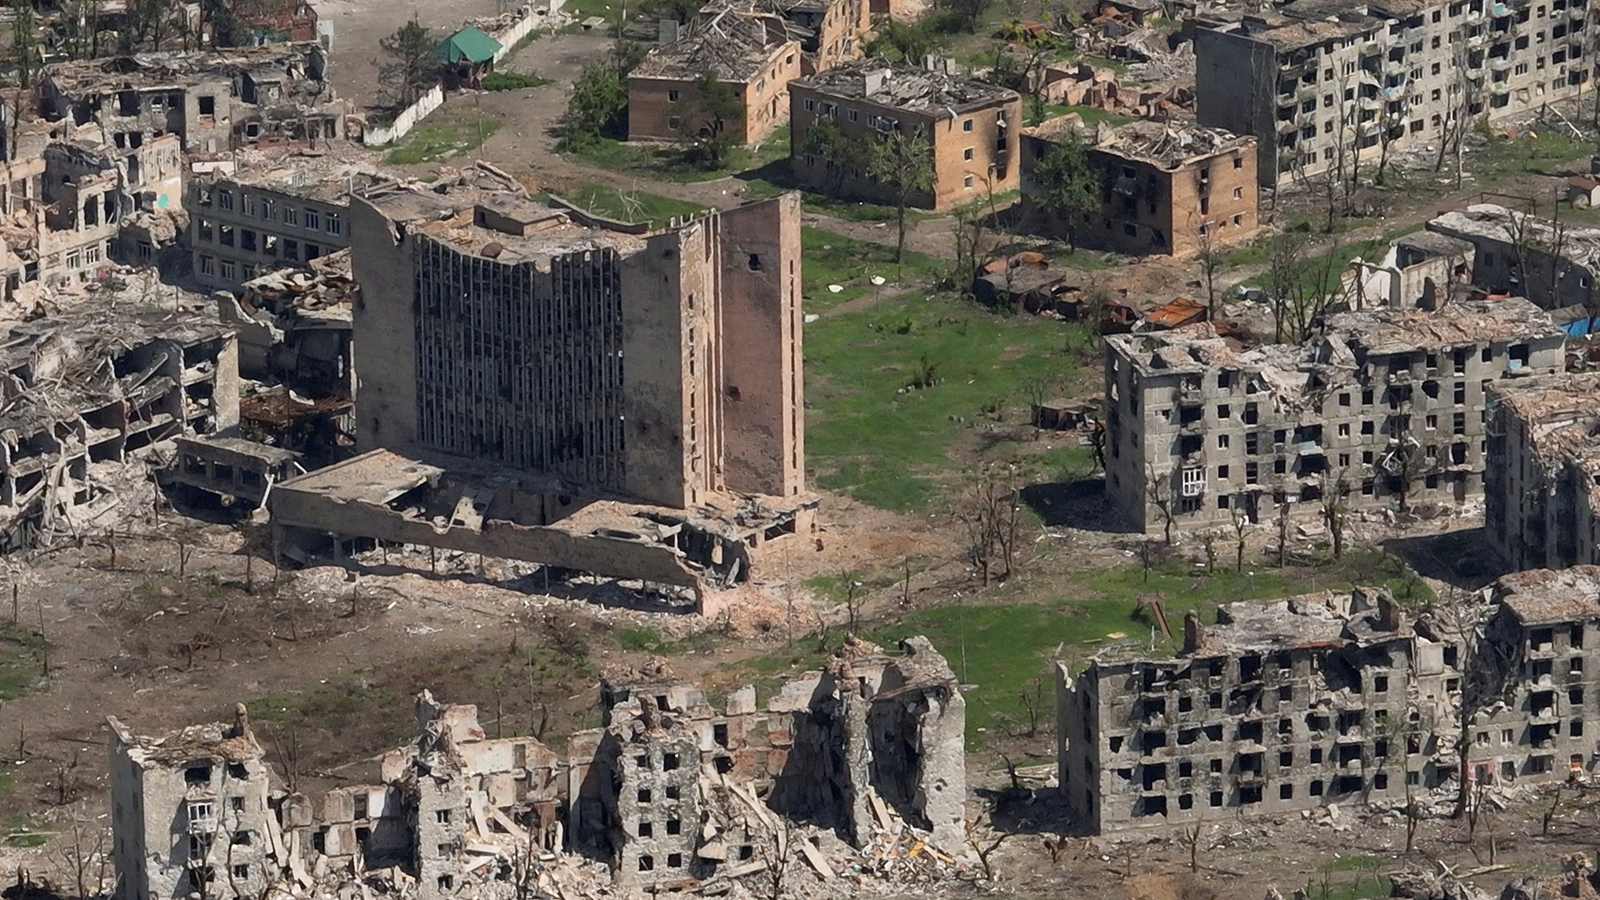 In this aerial view released on June 15, destroyed buildings are seeing in Bakhmut, Ukraine.